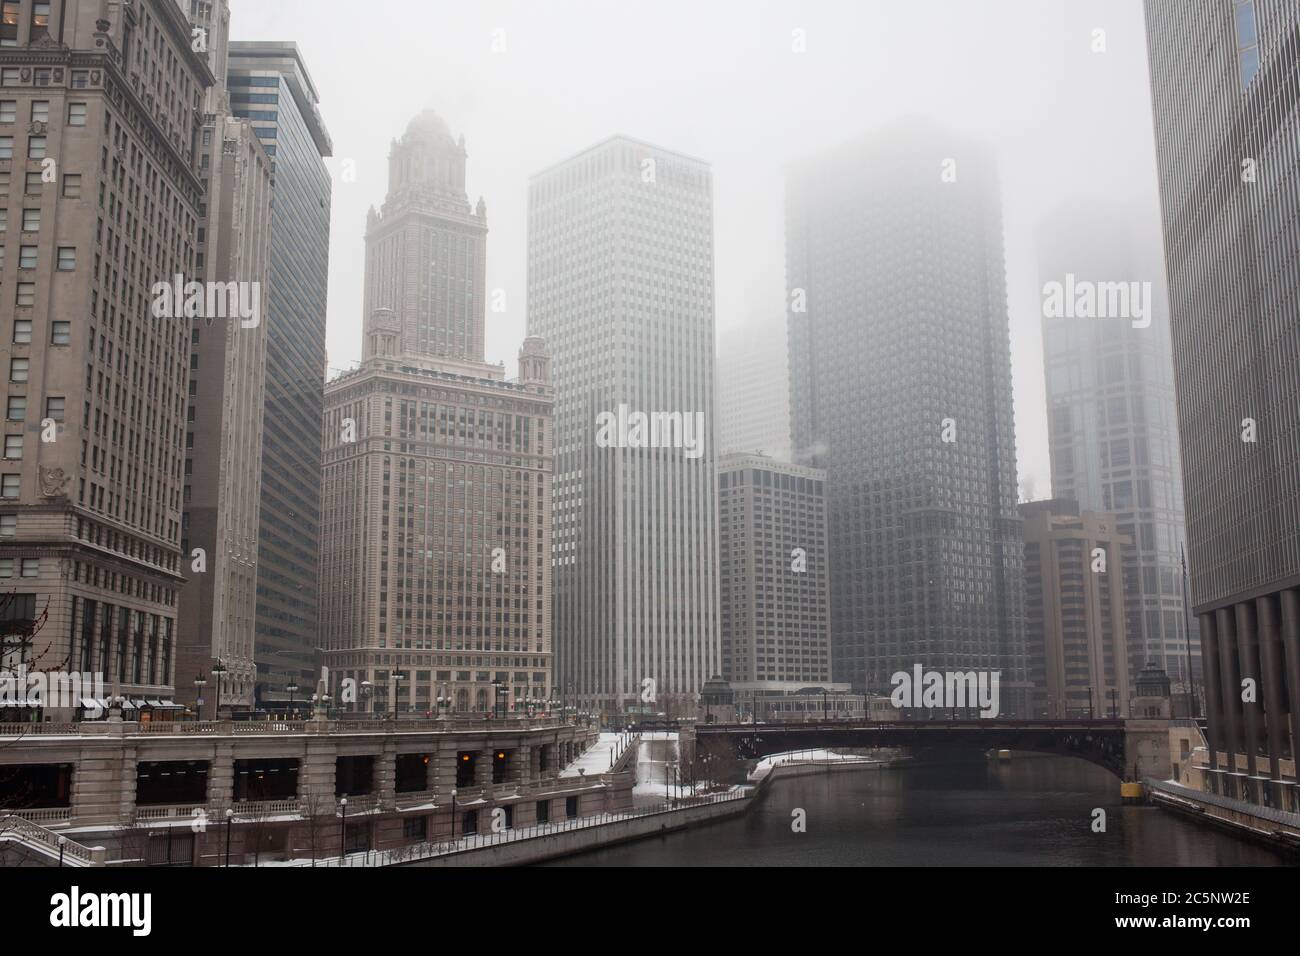 A view of of the Chicago river and city skyline during a heavy winter fog. Stock Photo